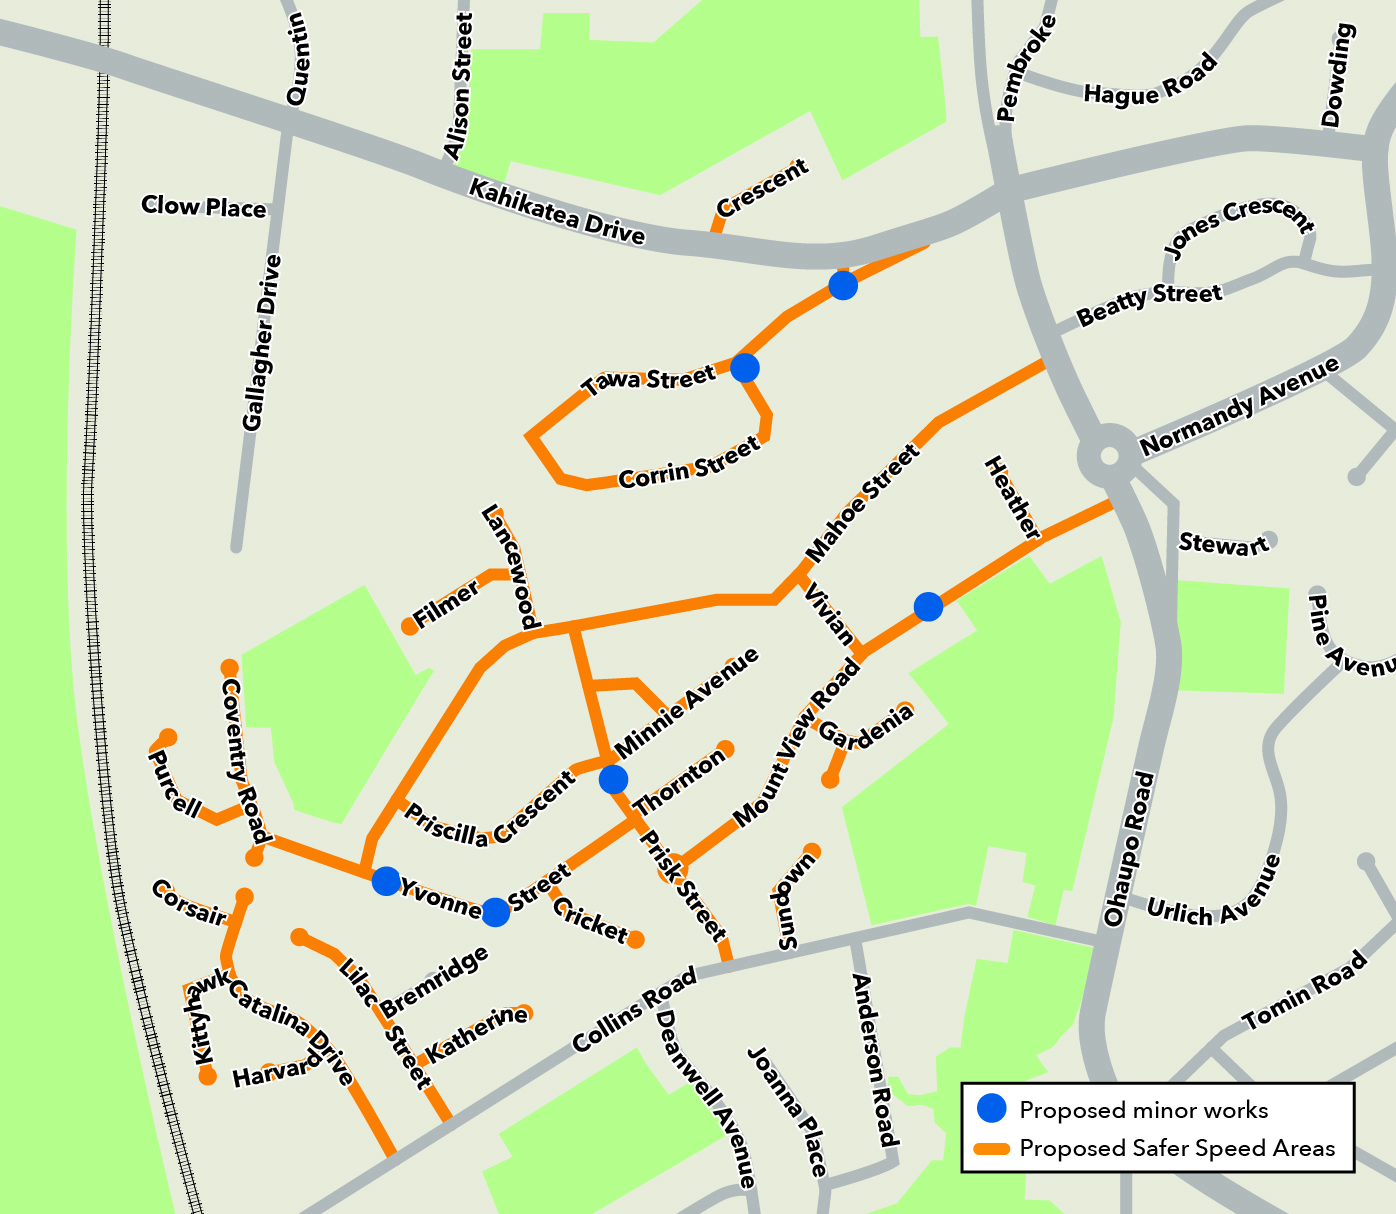 Map showing proposed safer speed areas of Mahoe Street and Melville area